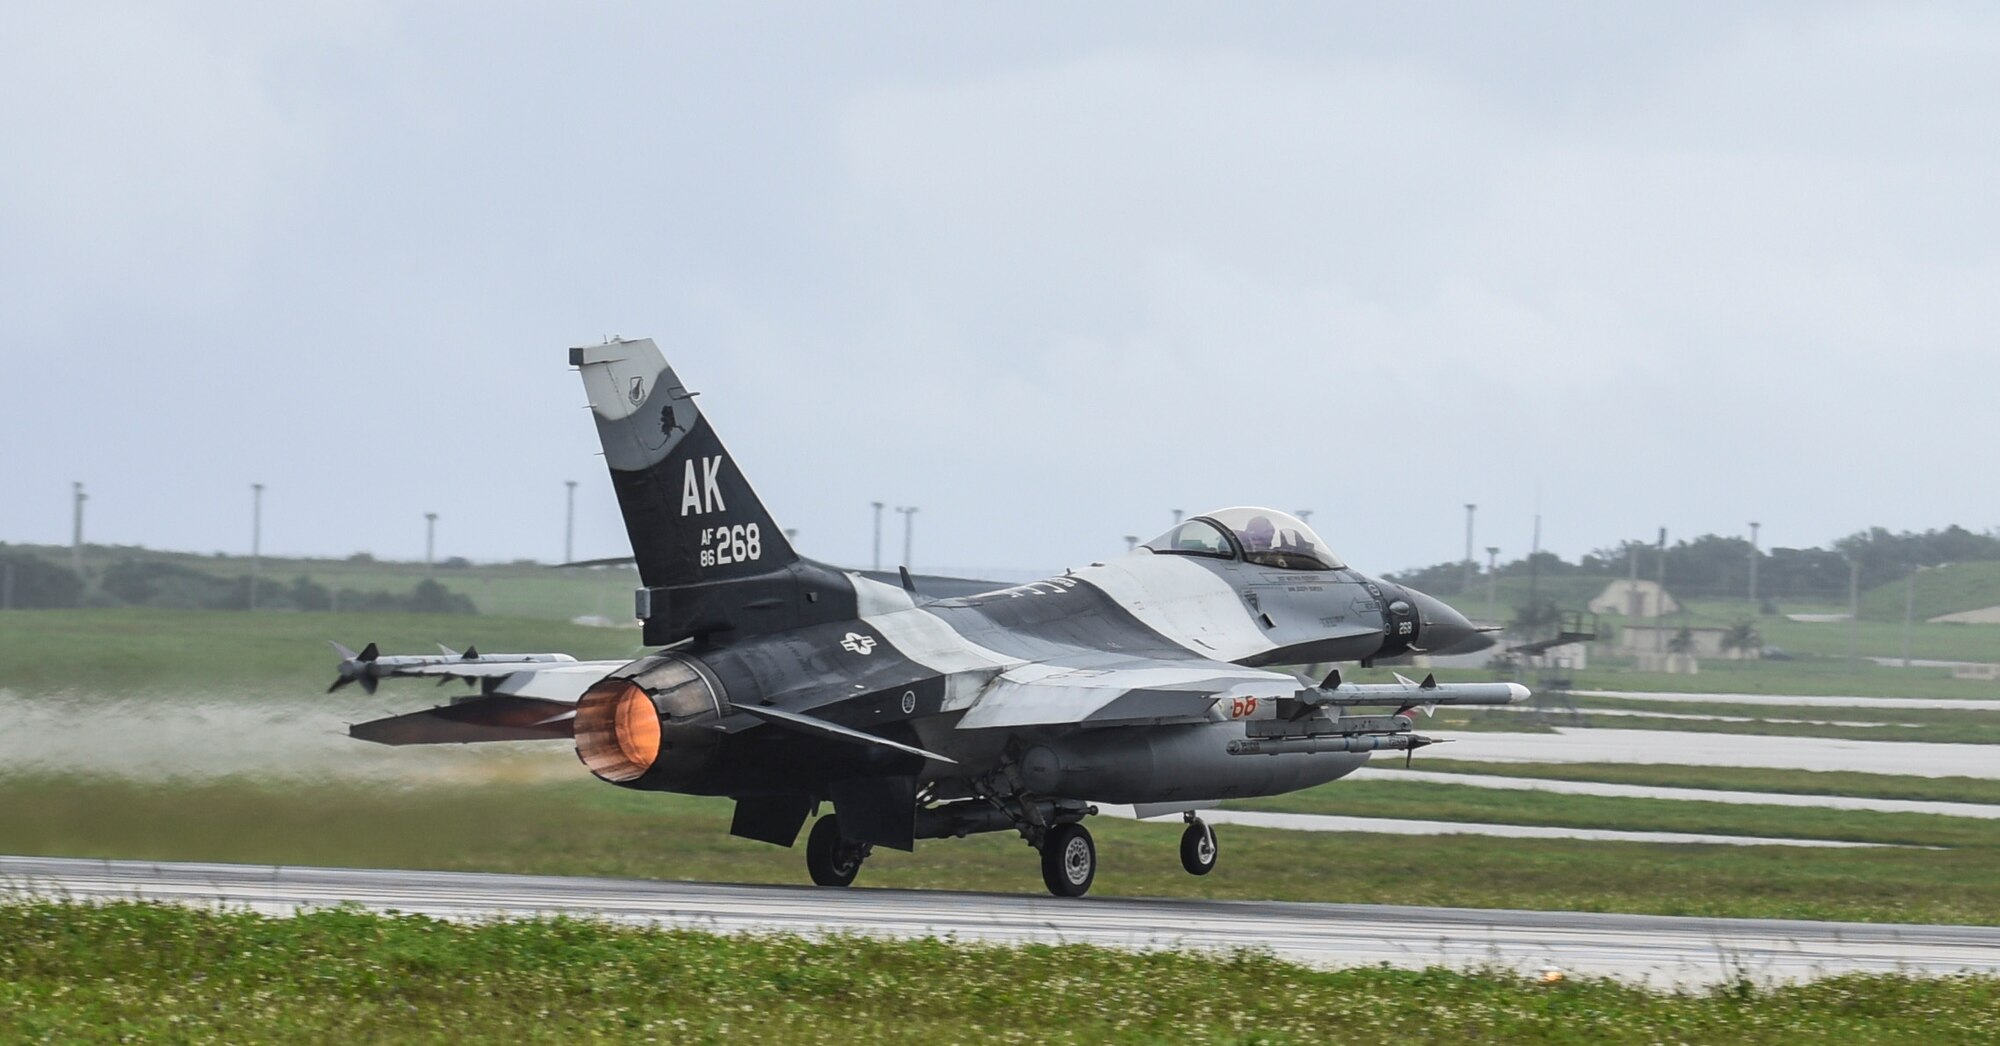 A U.S. Air Force F-16 Fighting Falcon assigned to the 18th Aggressor Squadron, Eielson Air Force Base, Alaska, takes off during Exercise Cope North 2017 at Andersen Air Force Base, Guam, Feb. 16, 2017. The exercise is designed to increase combat readiness between the United States, Australia and Japan, including fighter versus fighter air combat tactics training and air-to-ground strike mission training over the Farallon de Medinilla range 160 nautical miles north of Guam. (U.S. Air Force photo by Tech. Sgt. Richard P. Ebensberger/Released)